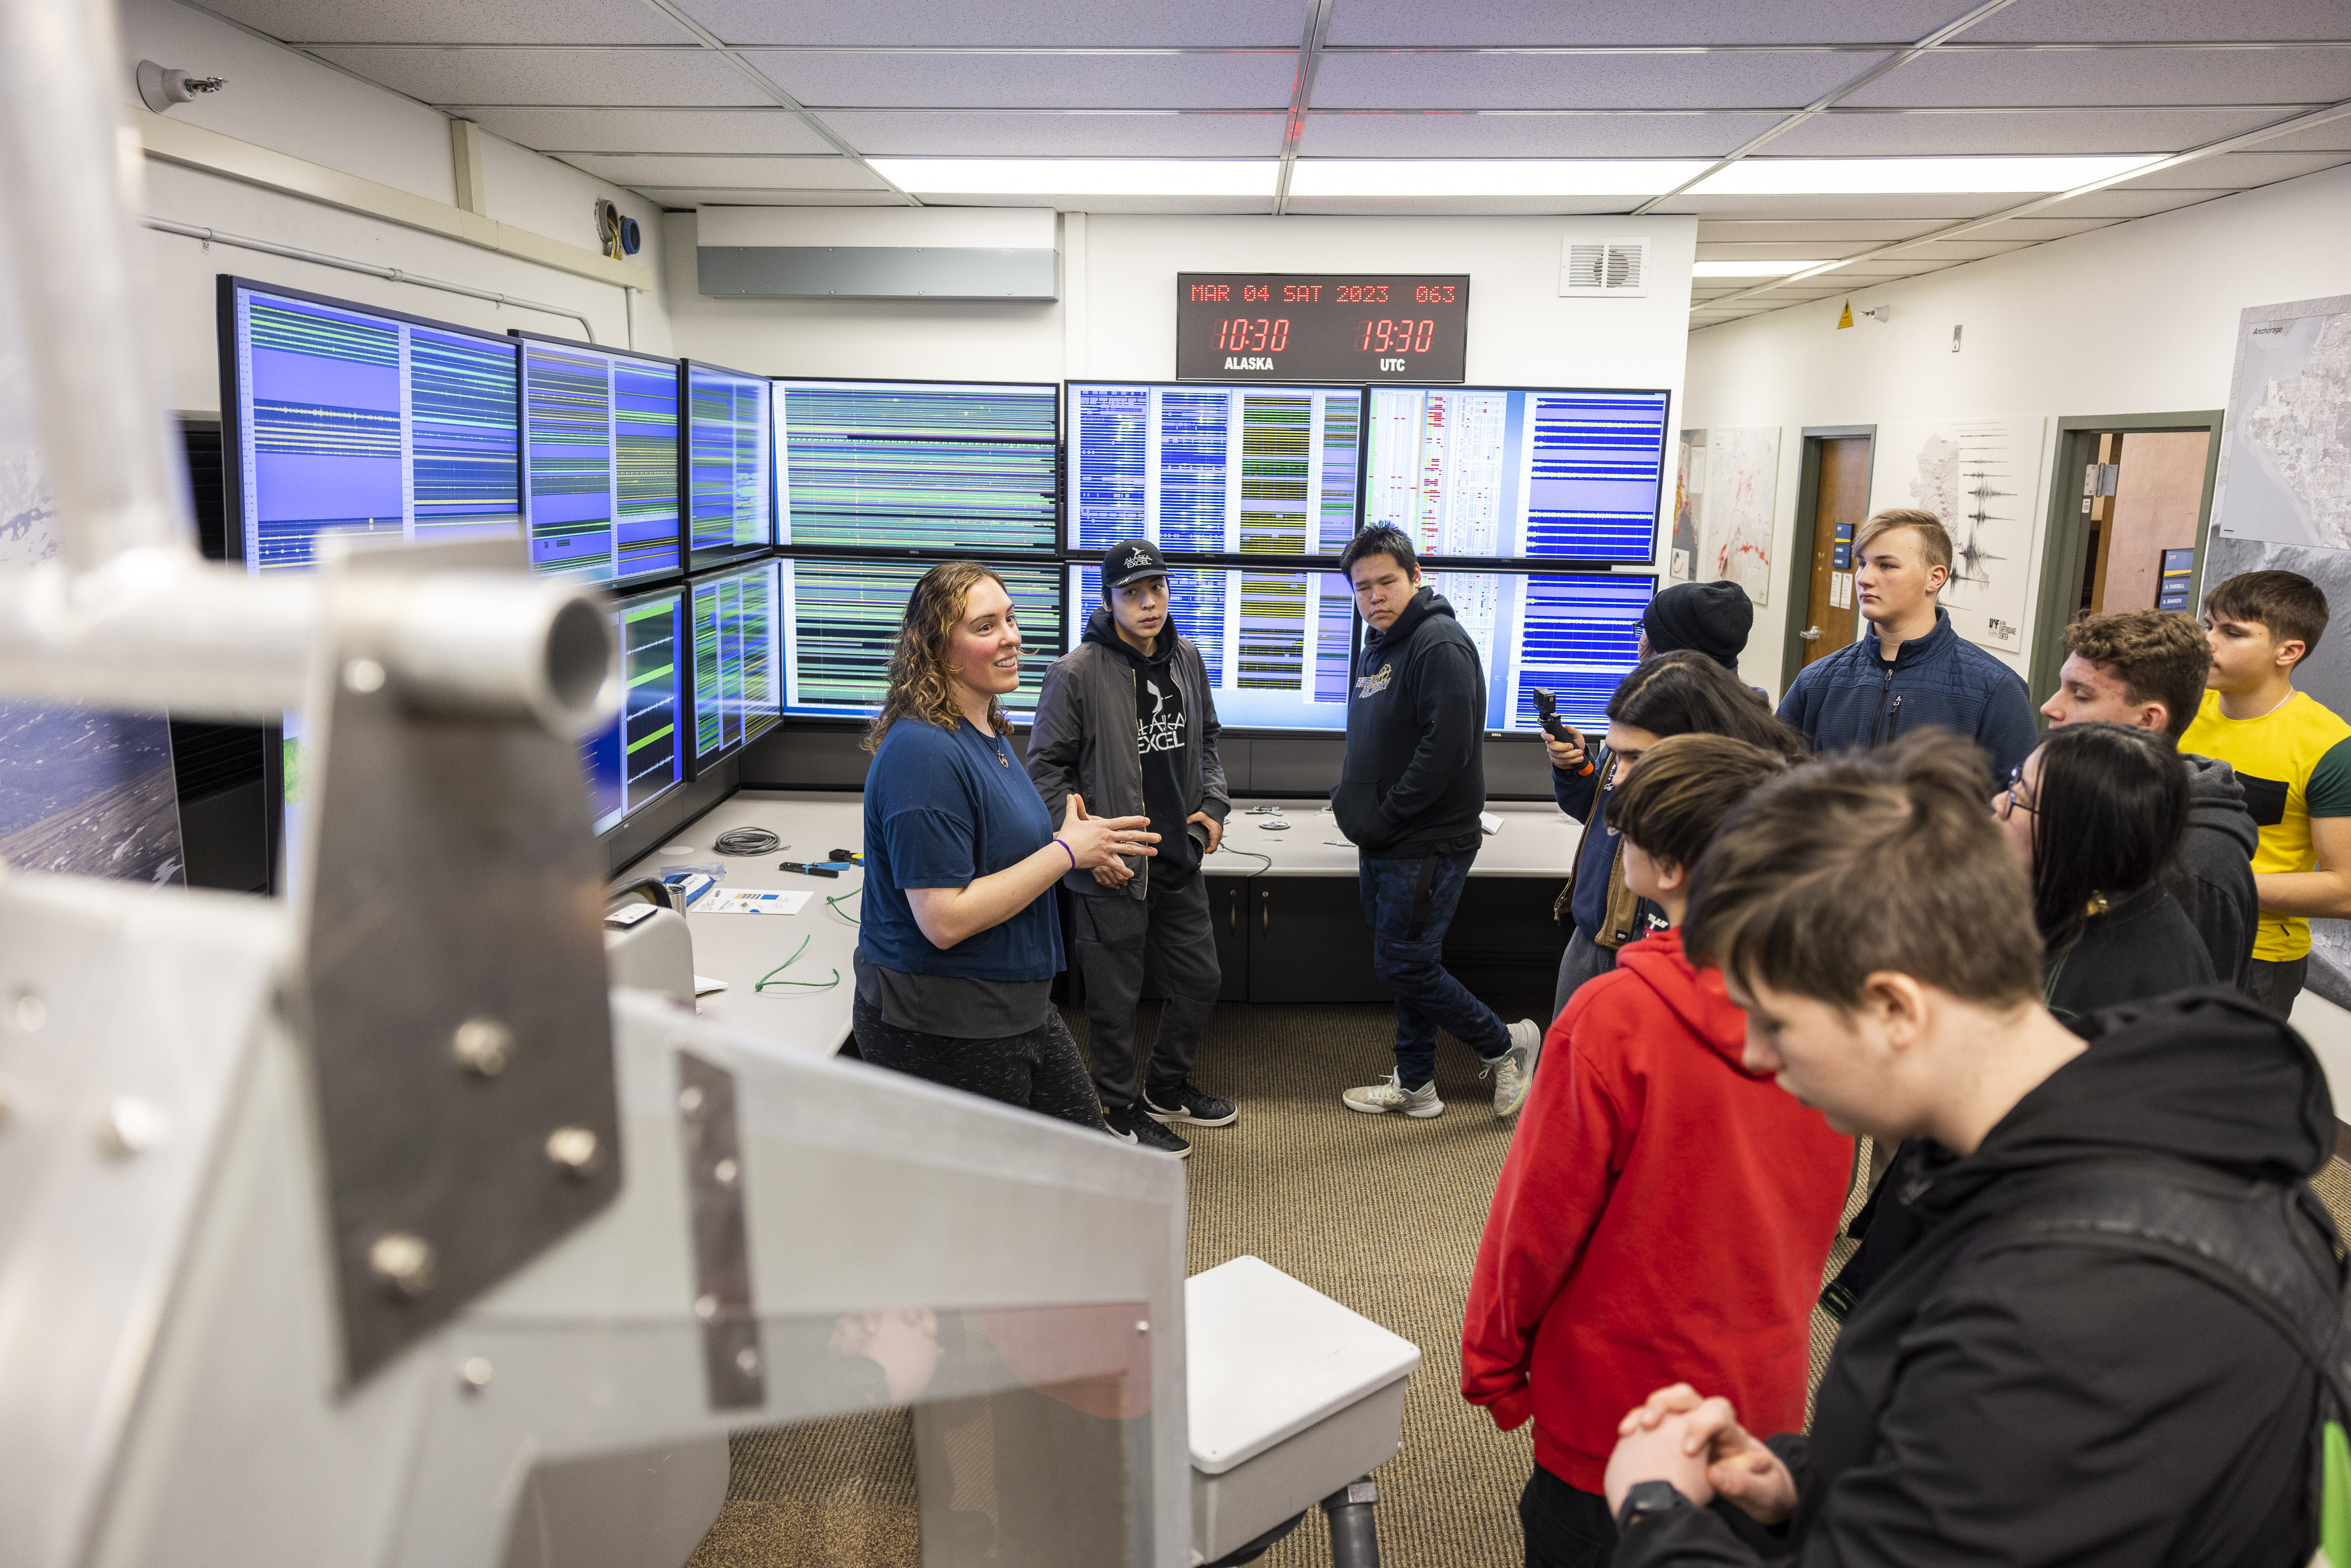 Female staff member standing in front of multiple seismograph monitors, talking to a group of high school students.